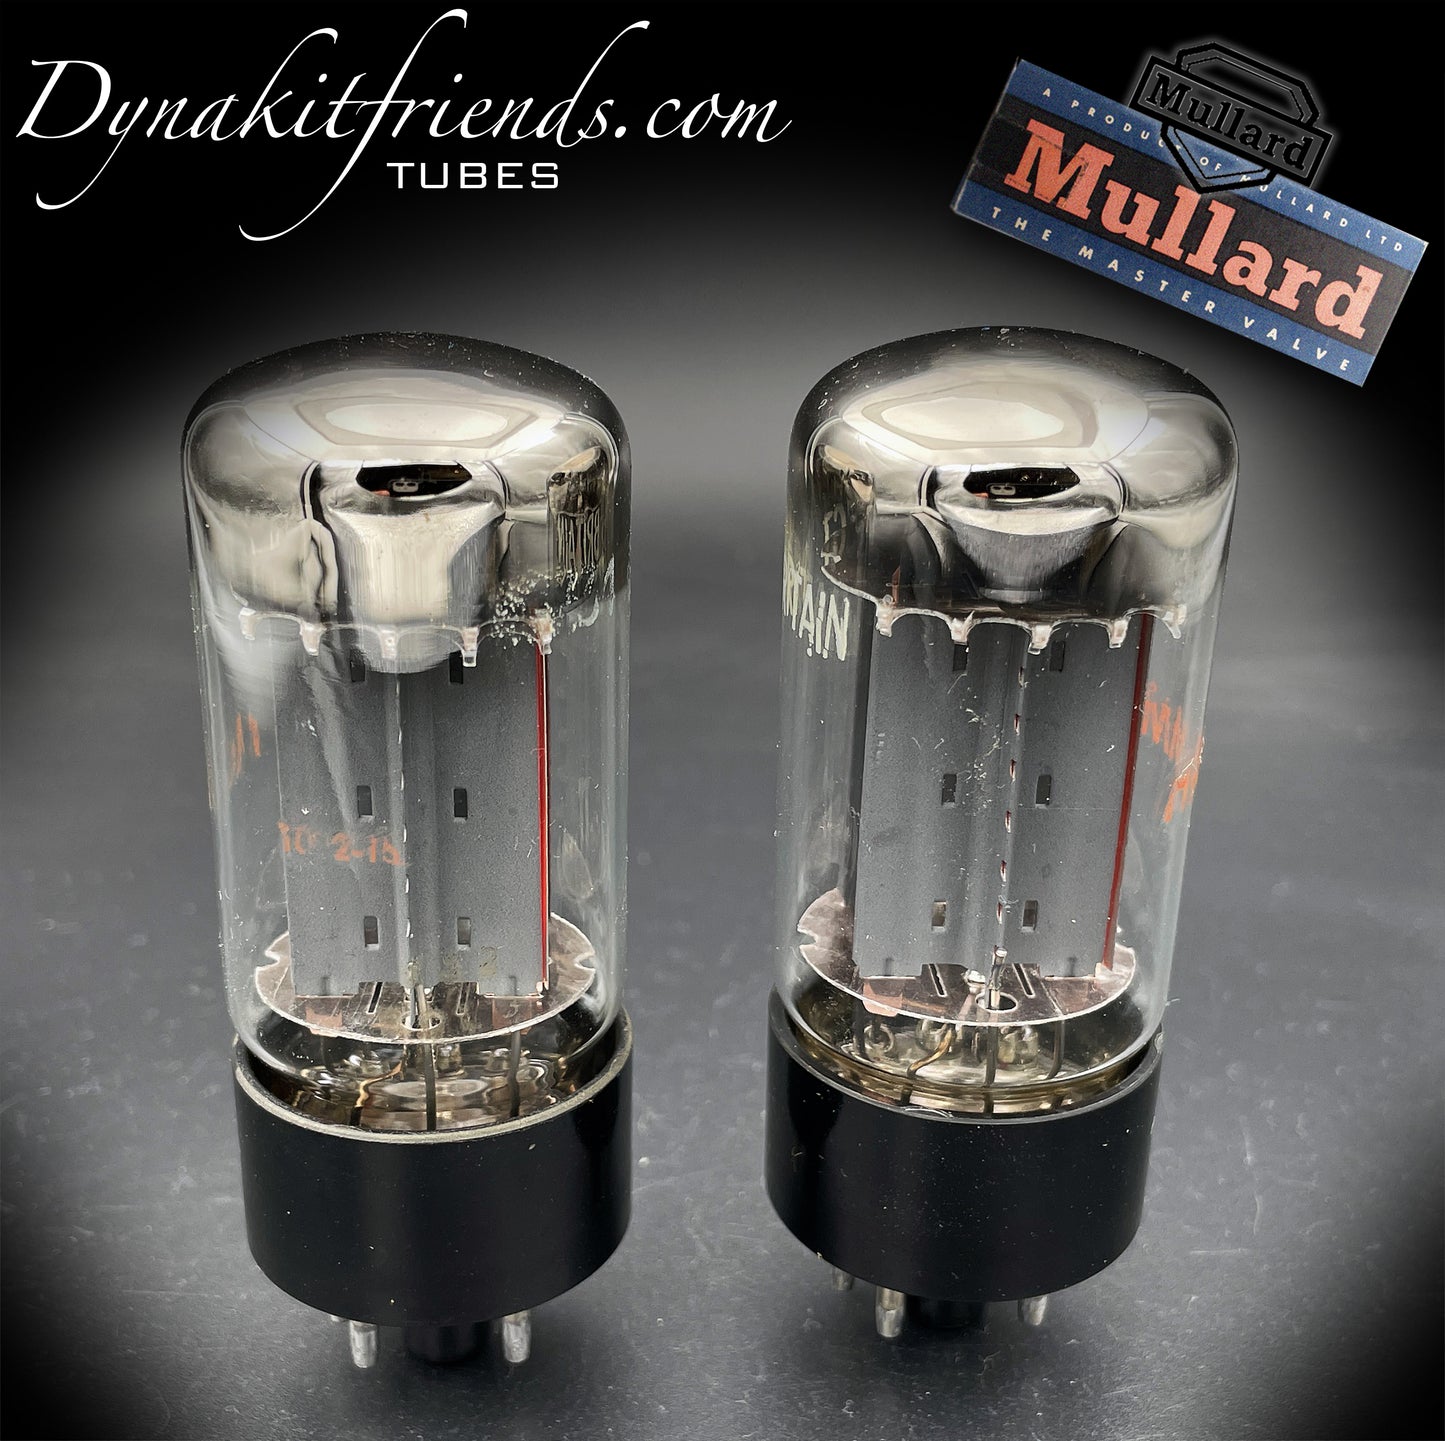 5AR4 ( GZ34 ) NOS MULLARD Blackburn 7 Notch Copper Plates Matched Pair Tubes Rectifiers Made in GT. BRITAIN